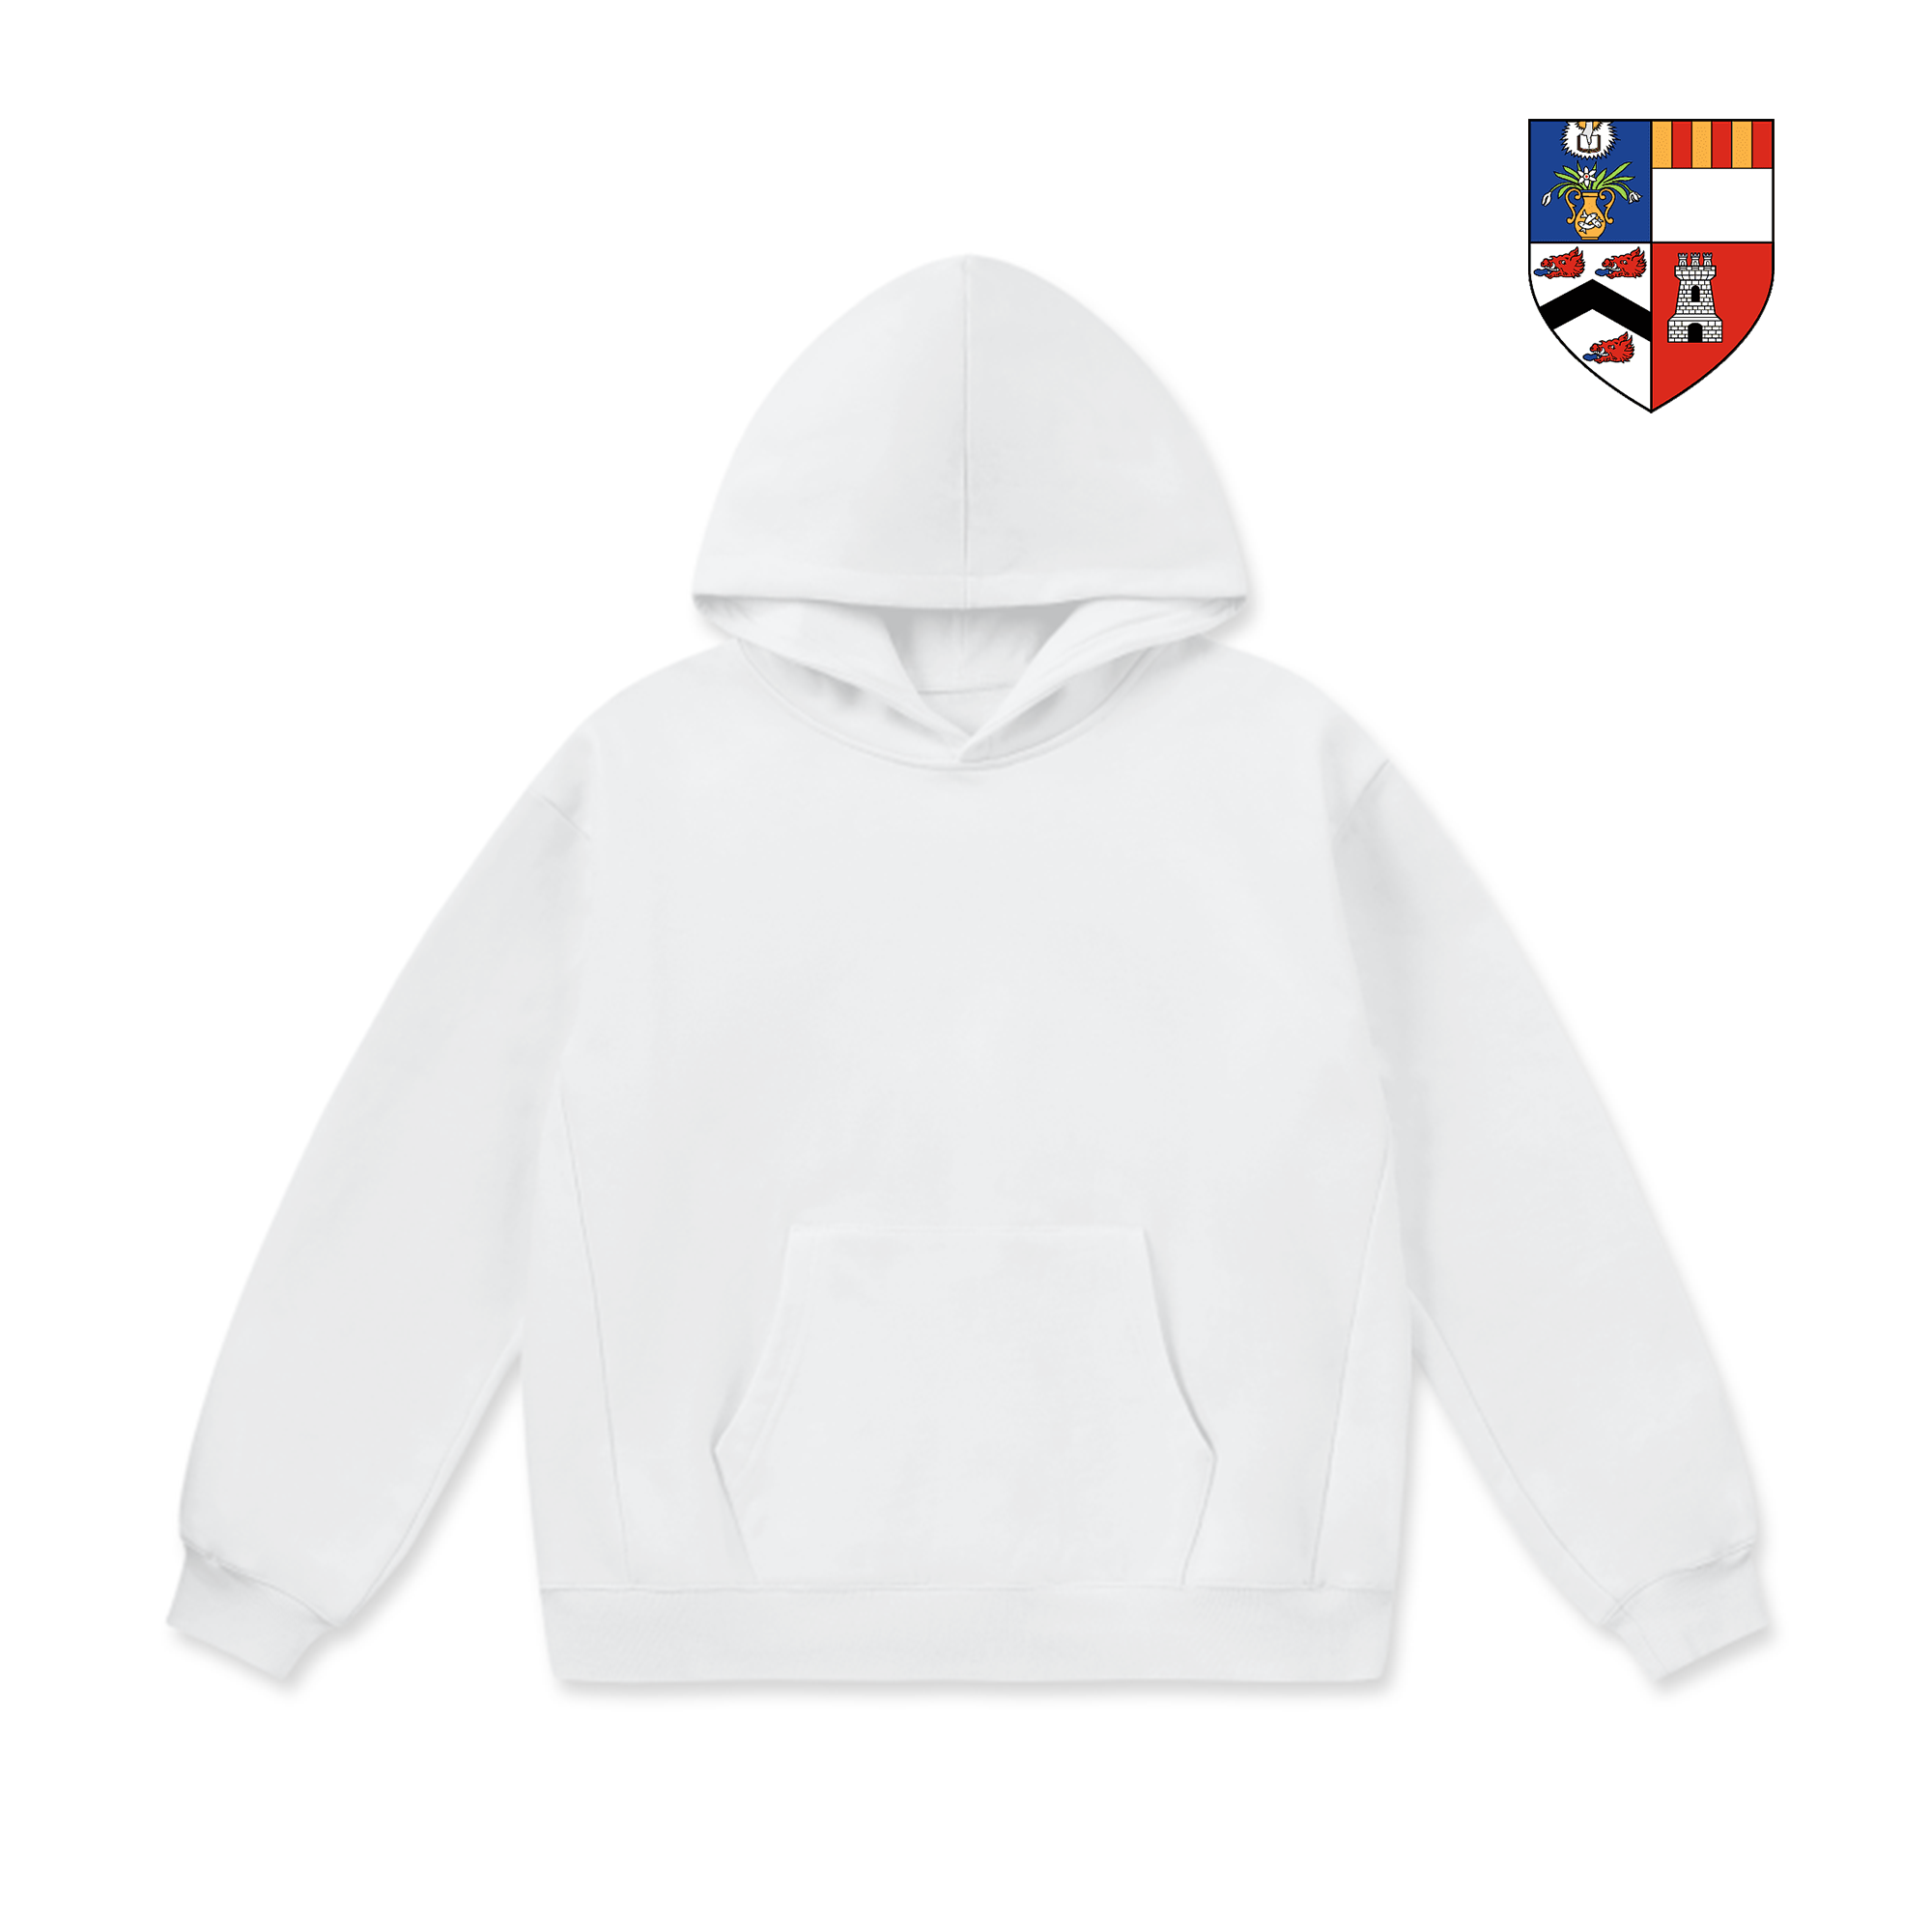 LCC Super Weighted Hoodie - University of Aberdeen (Classic)